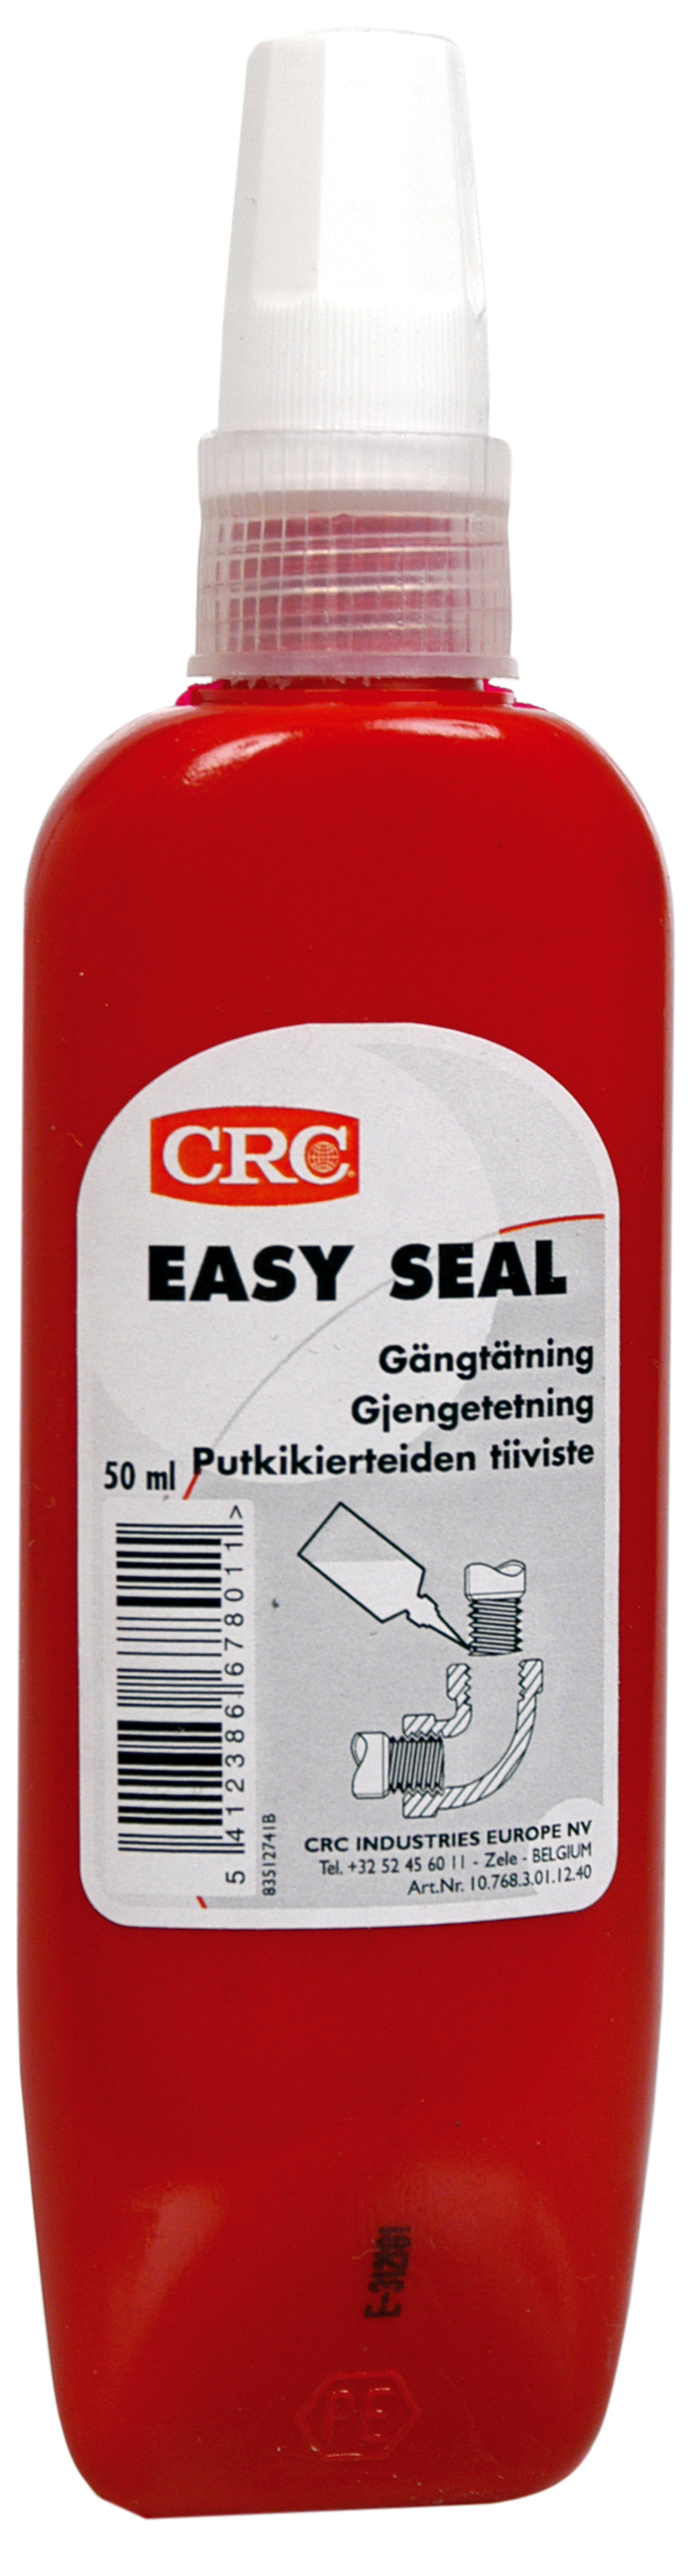 CRC Easy Seal 50 ml